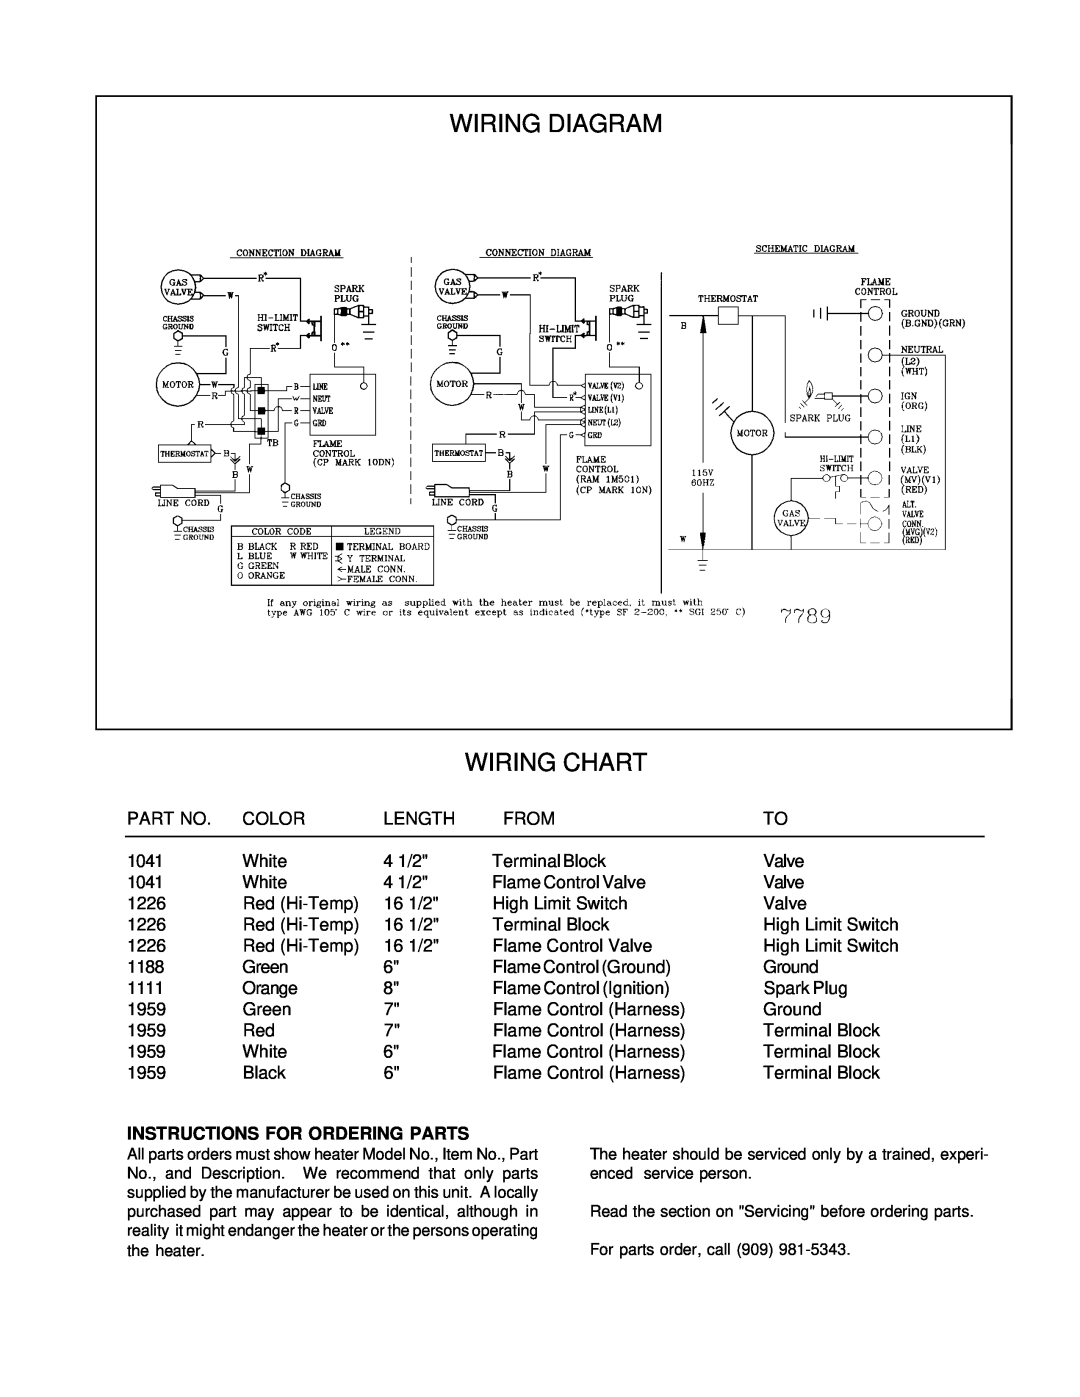 Universal 80-FAP, SPC-150T operating instructions Wiring Diagram Wiring Chart, Instructions For Ordering Parts 